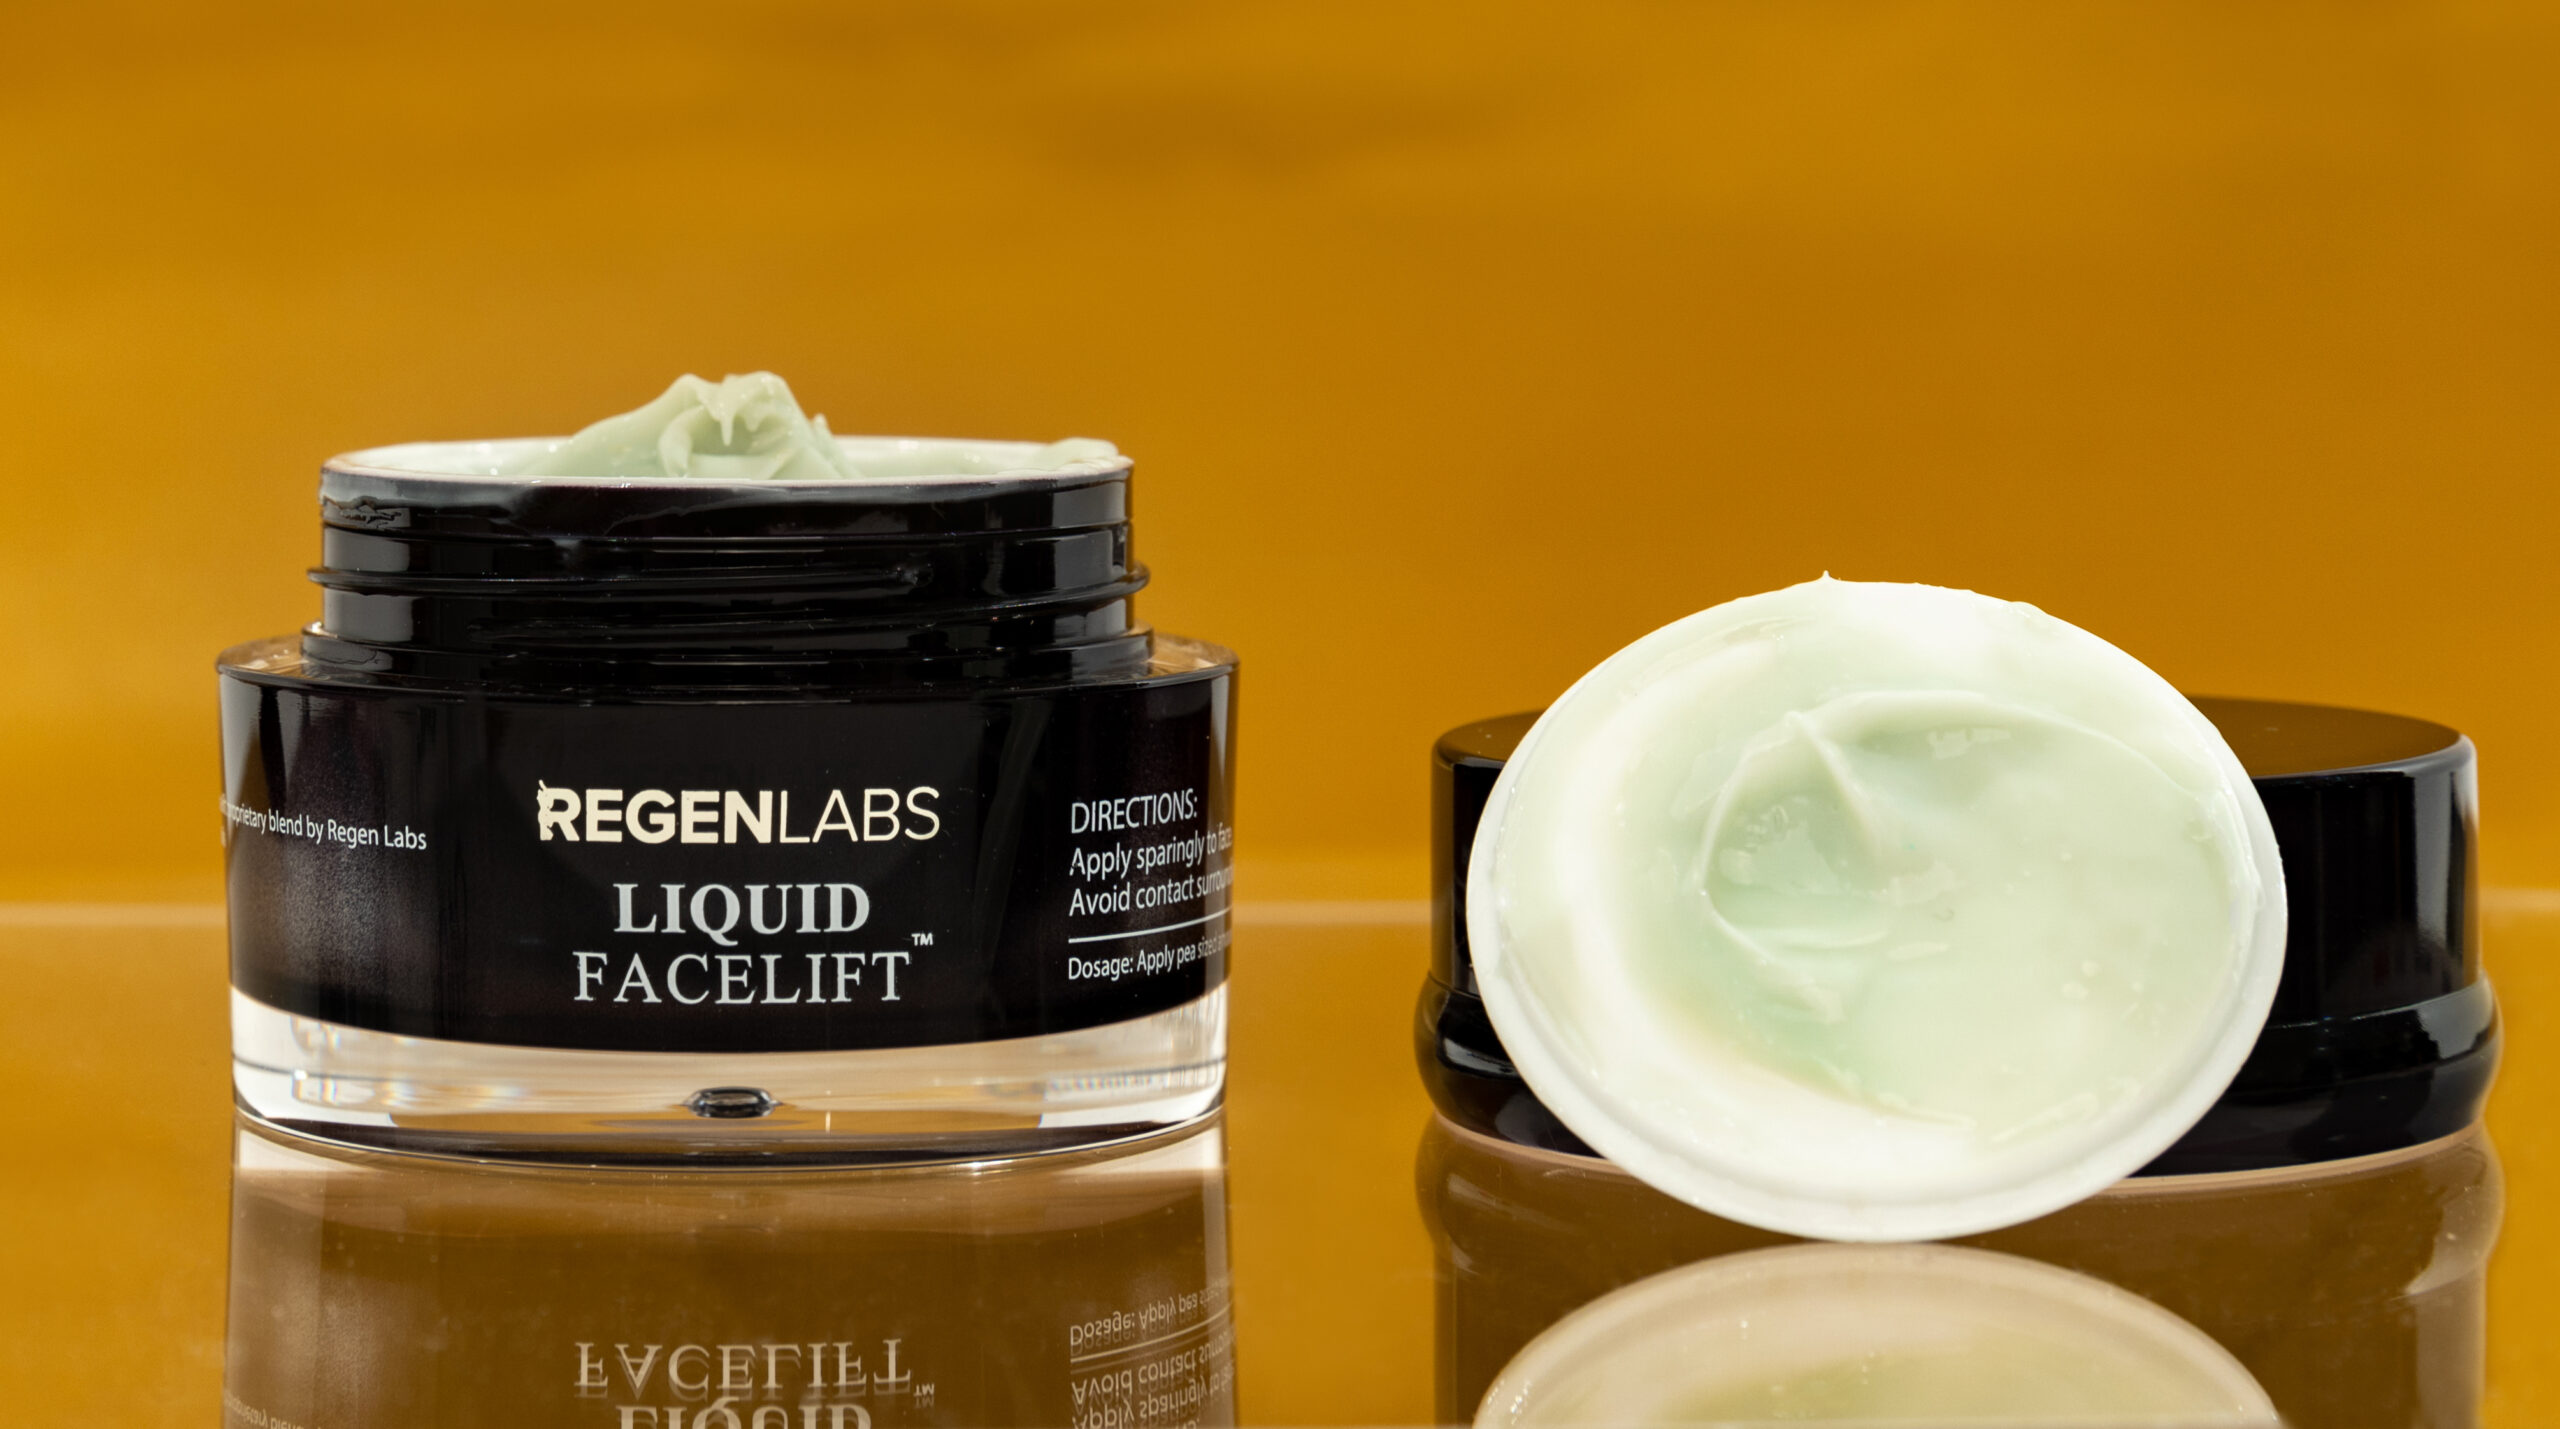 Regen Labs’ ‘Liquid Facelift’ Cream for Mother's Day gifting